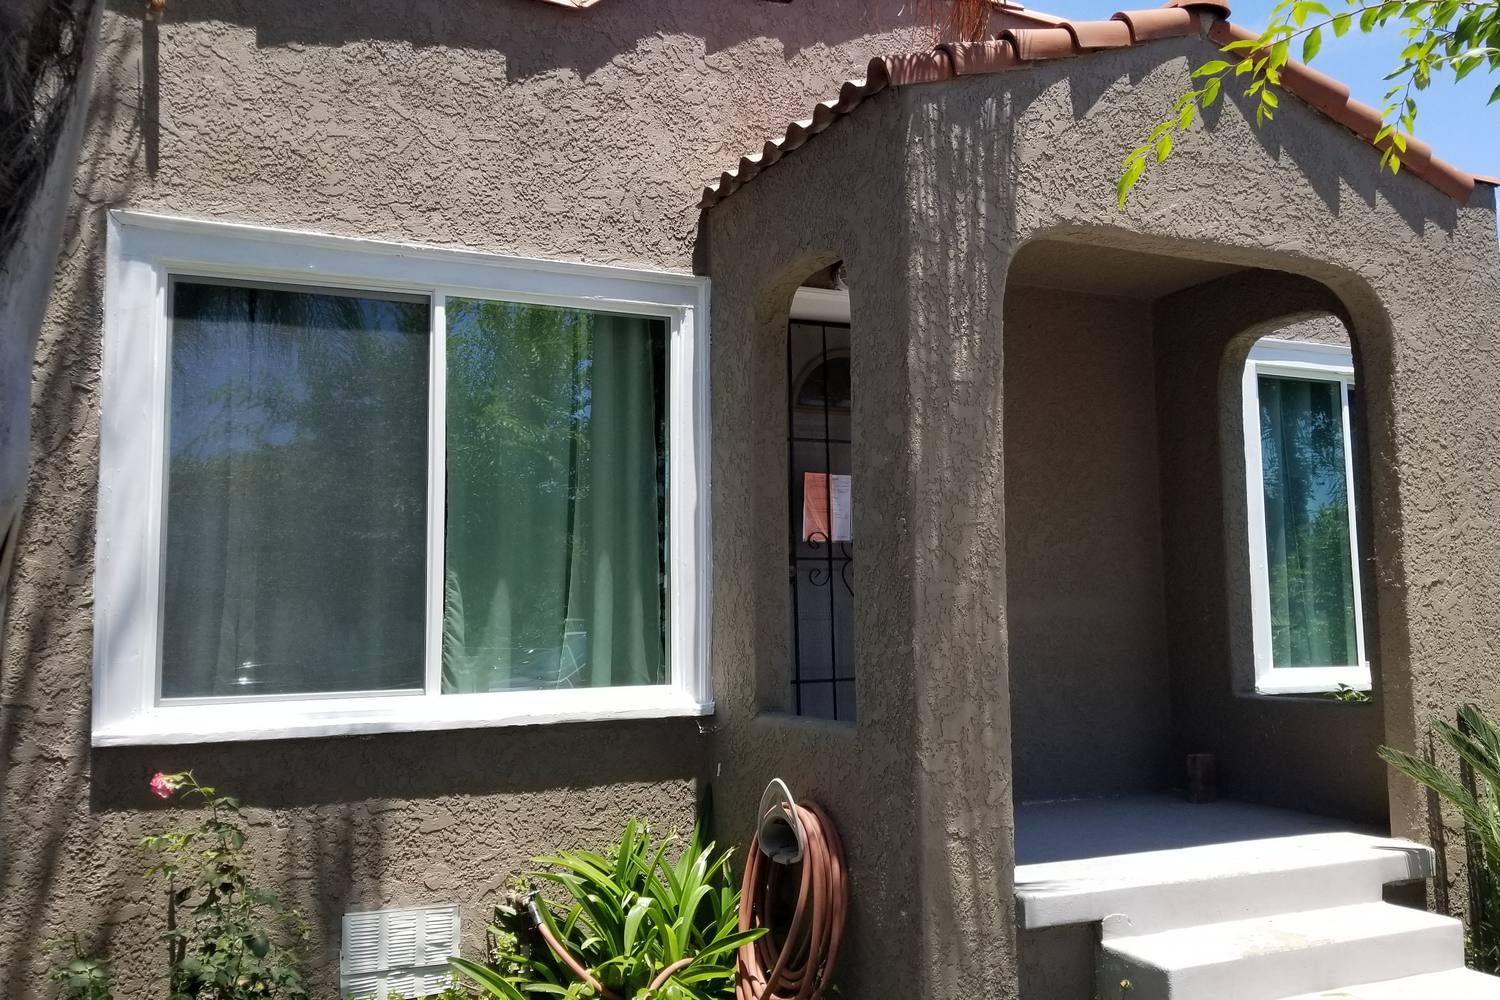 Window Replacement In Thousand Oaks, CA (5)